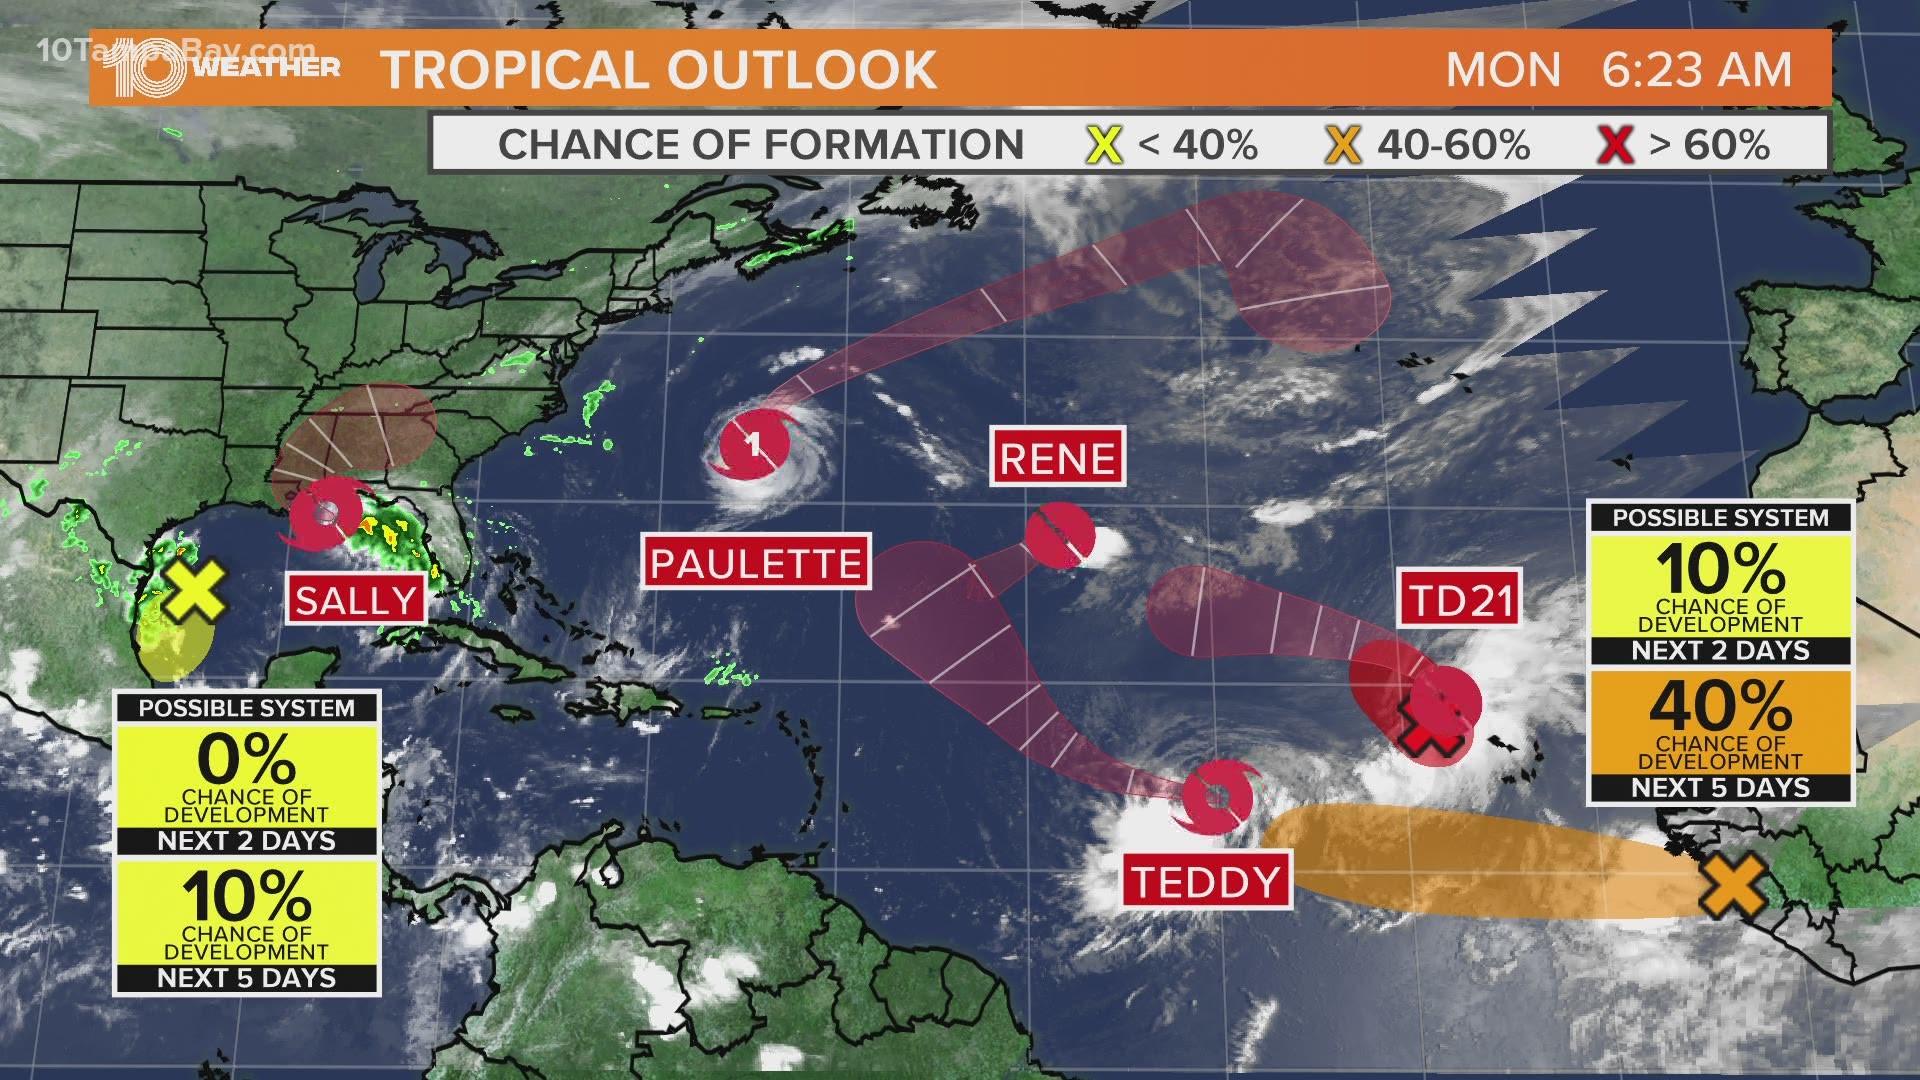 The tropics are super busy on Monday, Sept. 14, 2020. There is Hurricane Paulette, tropical storms Sally and Teddy, Tropical Depressions 21 and TD Rene.